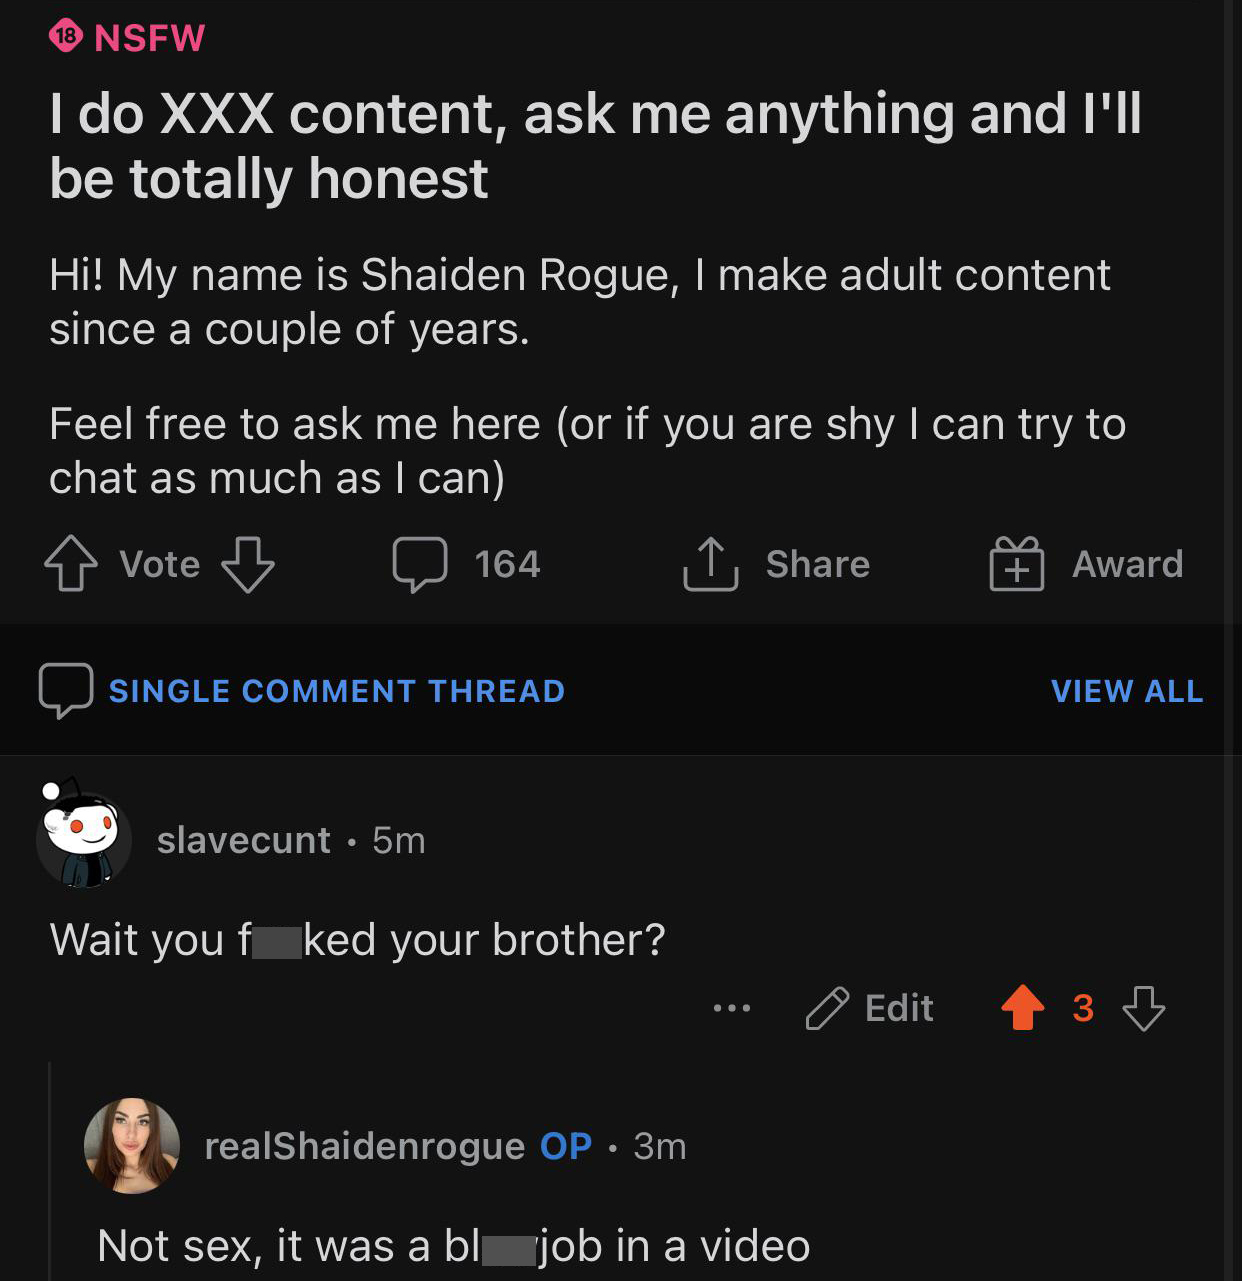 screenshot - 18 Nsfw I do Xxx content, ask me anything and I'll be totally honest Hi! My name is Shaiden Rogue, I make adult content since a couple of years. Feel free to ask me here or if you are shy I can try to chat as much as I can o vote B 164 Award 